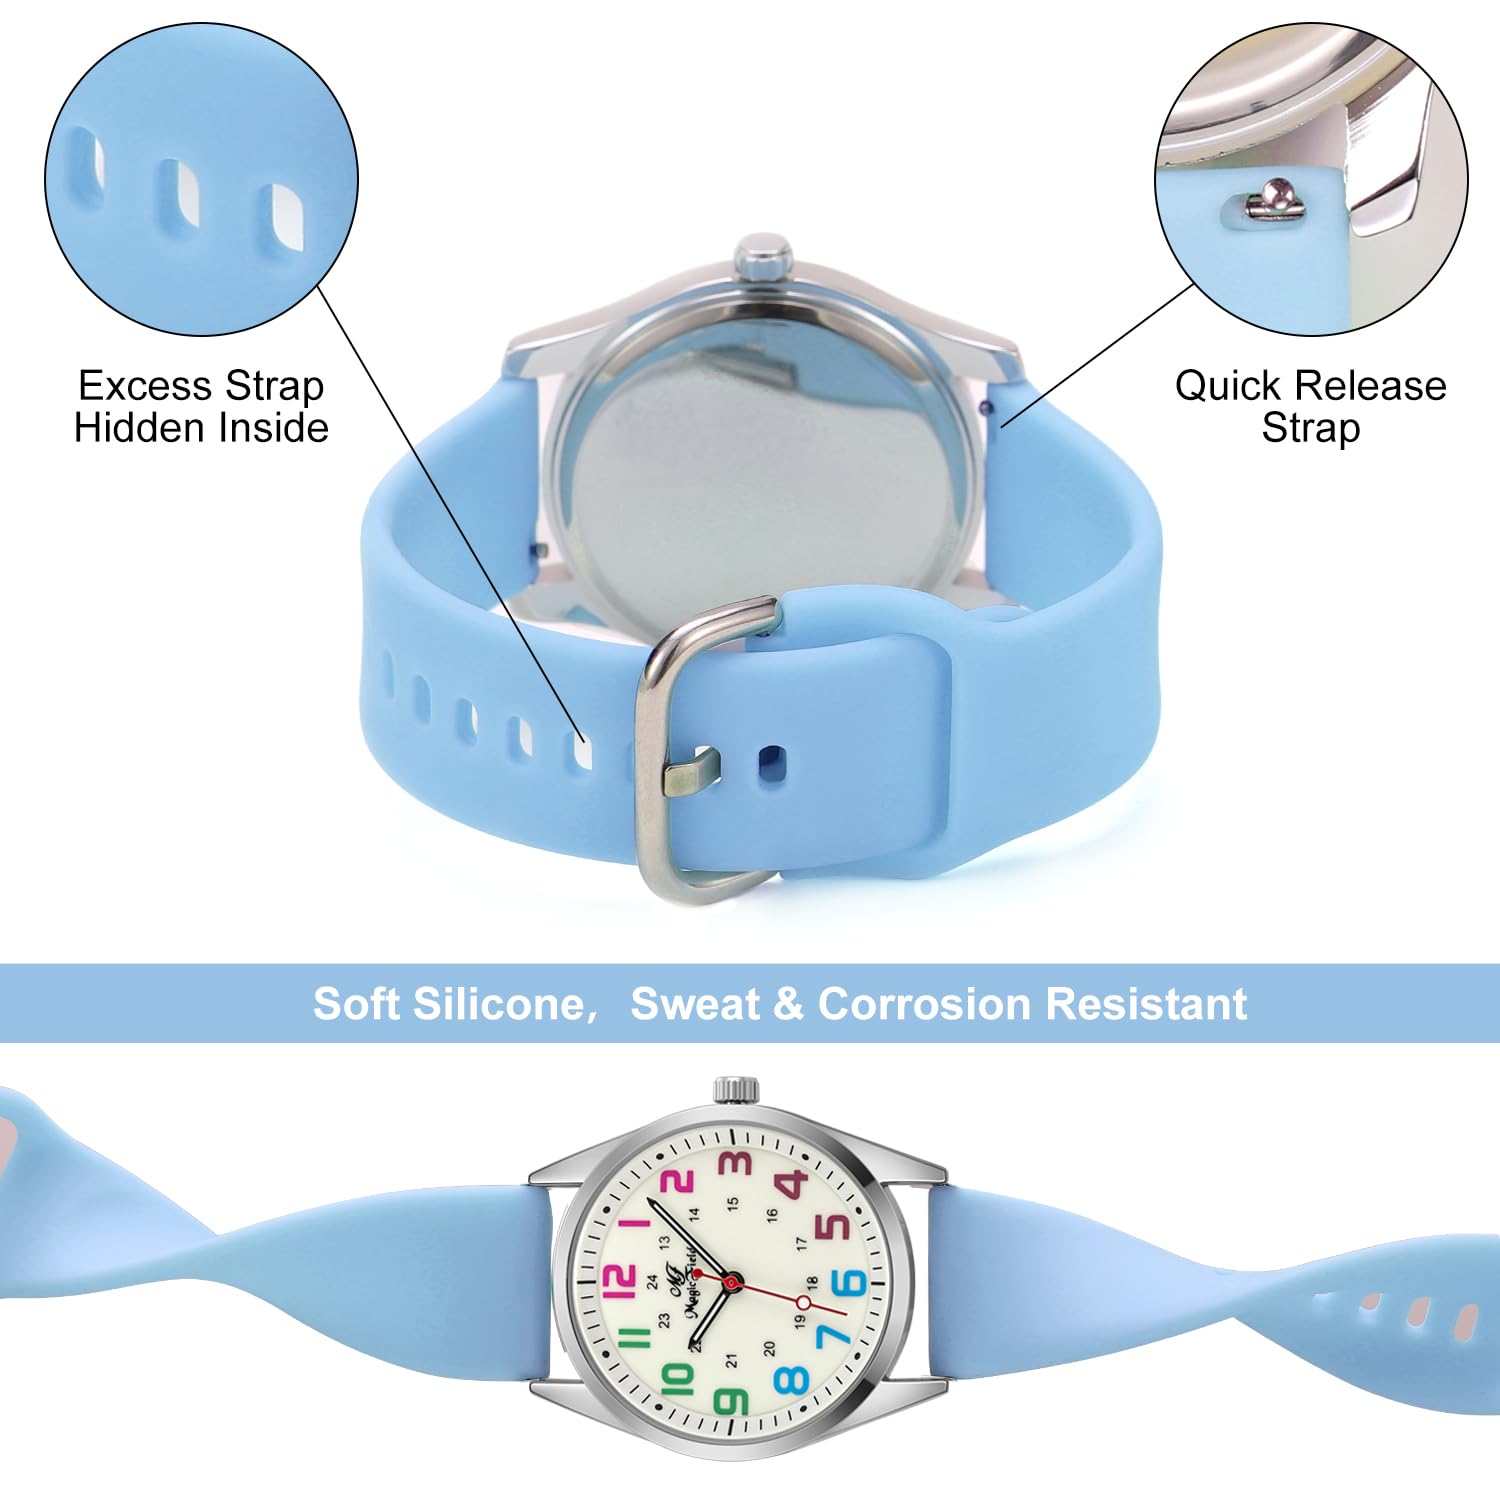 SIBOSUN Wrist Watch Nurse Watch Easy to Read Watches for Medical Students, Nurse, Doctors, Quartz Analog Second Hand Luminous Waterproof Silicone Straps Quick Release Watch for Men Women